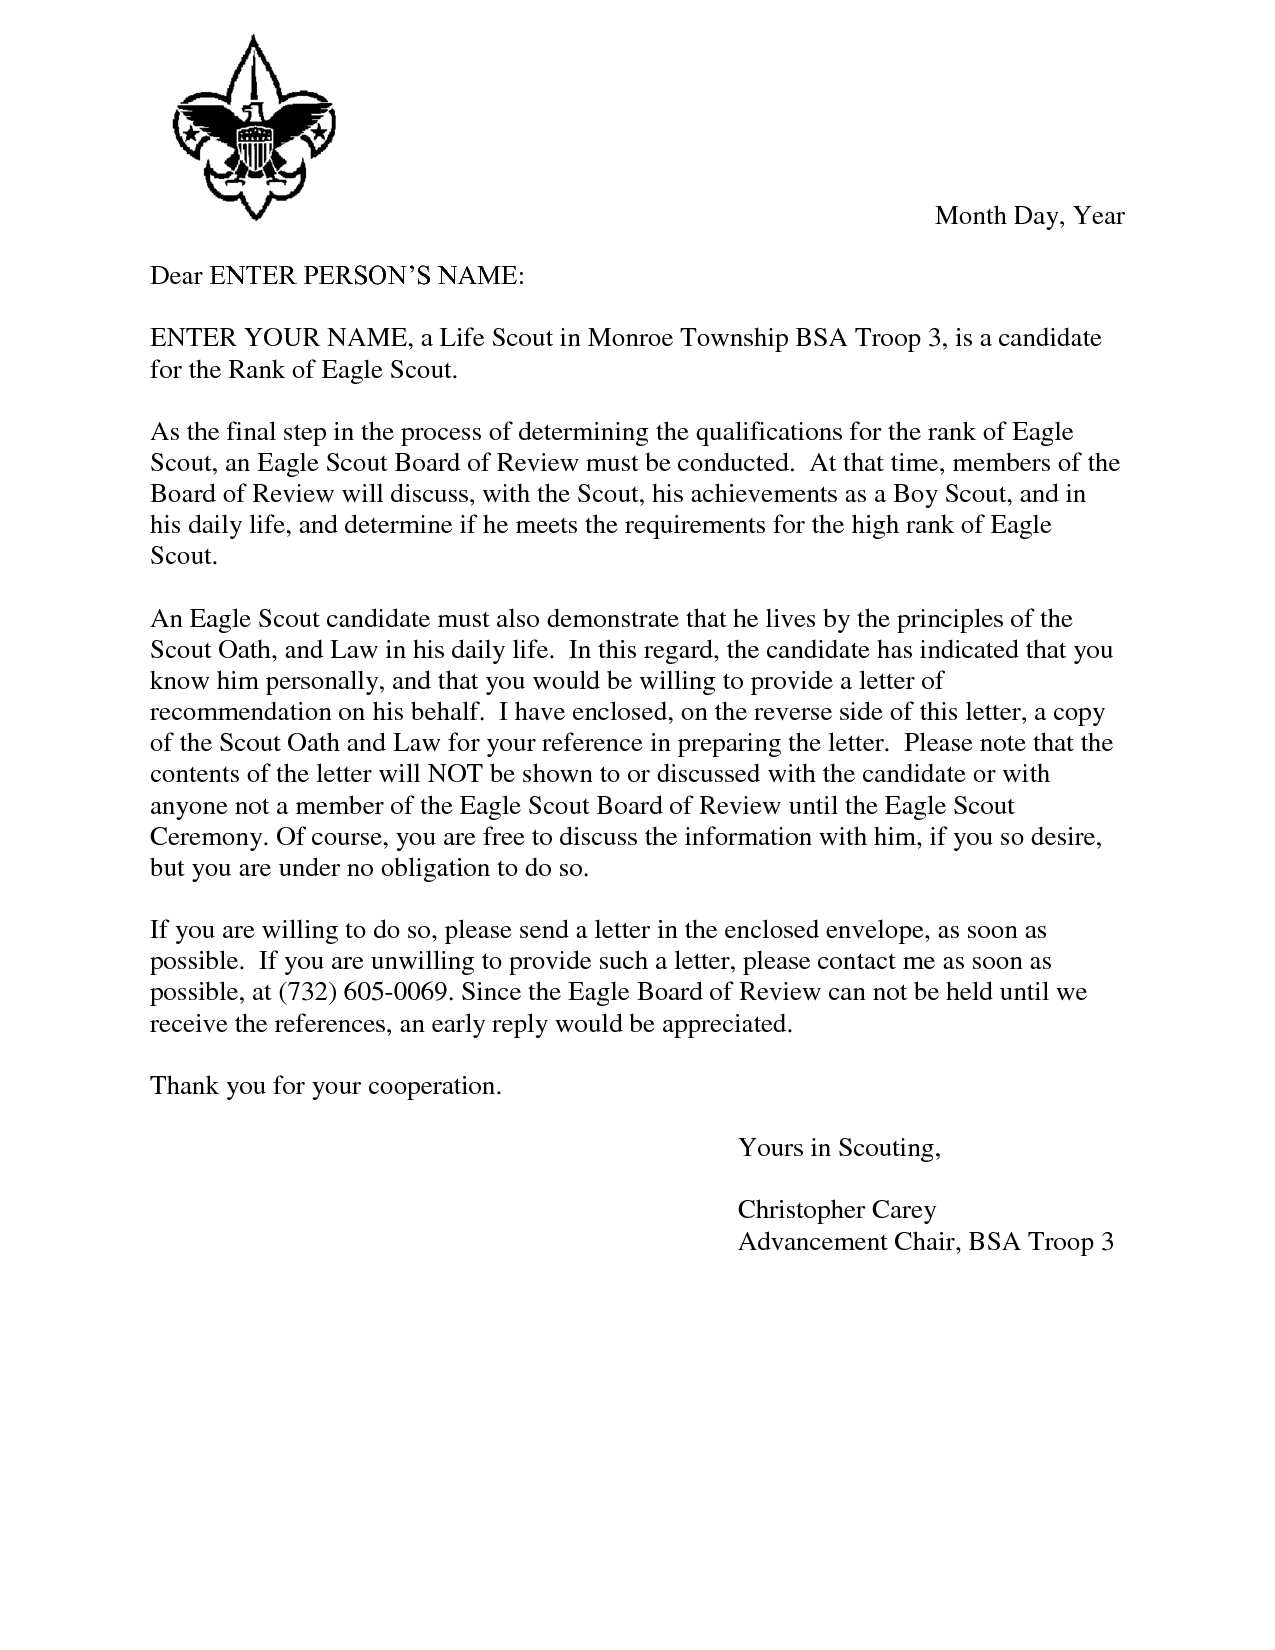 Eagle Scout Reference Request Sample Letter Doc 7 Hfr990q throughout dimensions 1275 X 1650